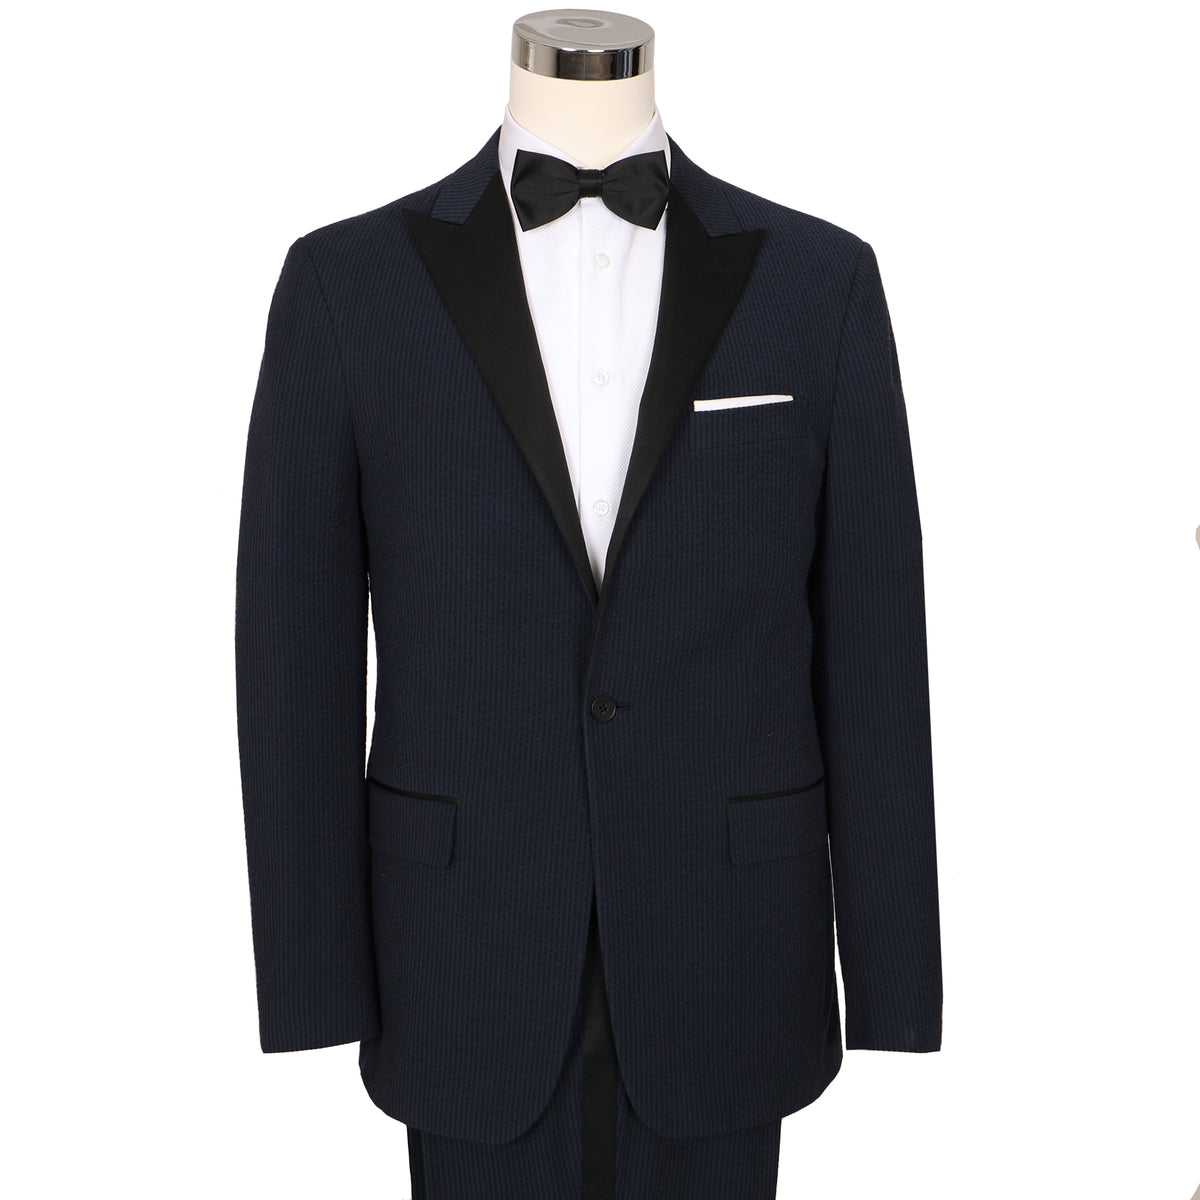 Stand out in a room full of penguins with this navy/black masterpiece. Bond ain&#39;t got nothing on you in this seersucker tux. Nail those new moves with stretch.  ** Pant waist is 6&quot; smaller than the chest measurement. For example, if you order a 40R jacket, the pant size will be 34 **